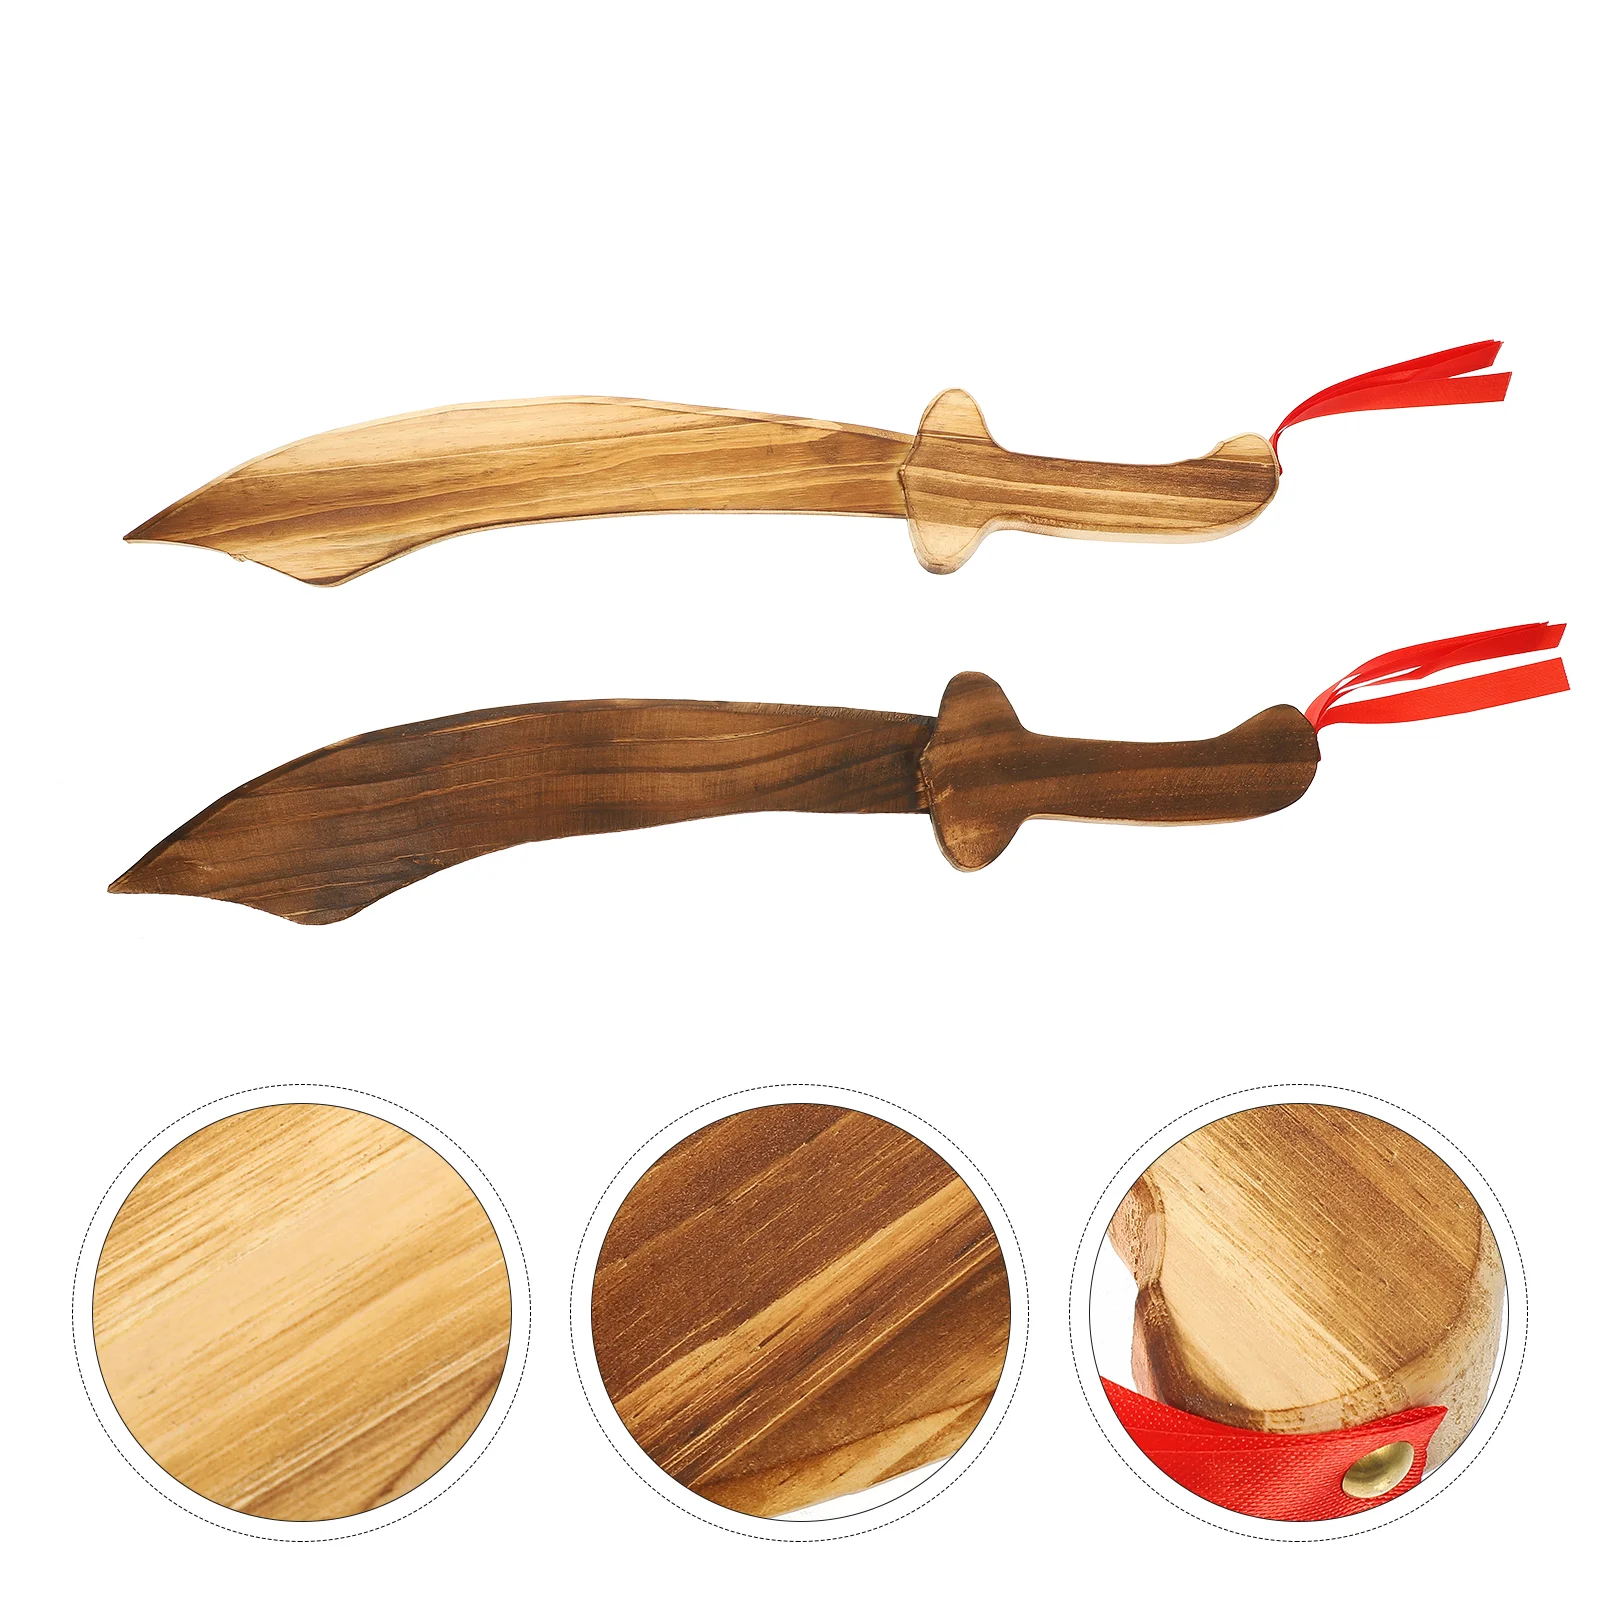 

2 Pcs Wooden Toy Sword Plaything Swords Fighting Toys Carbonized Kids Adventure Travel